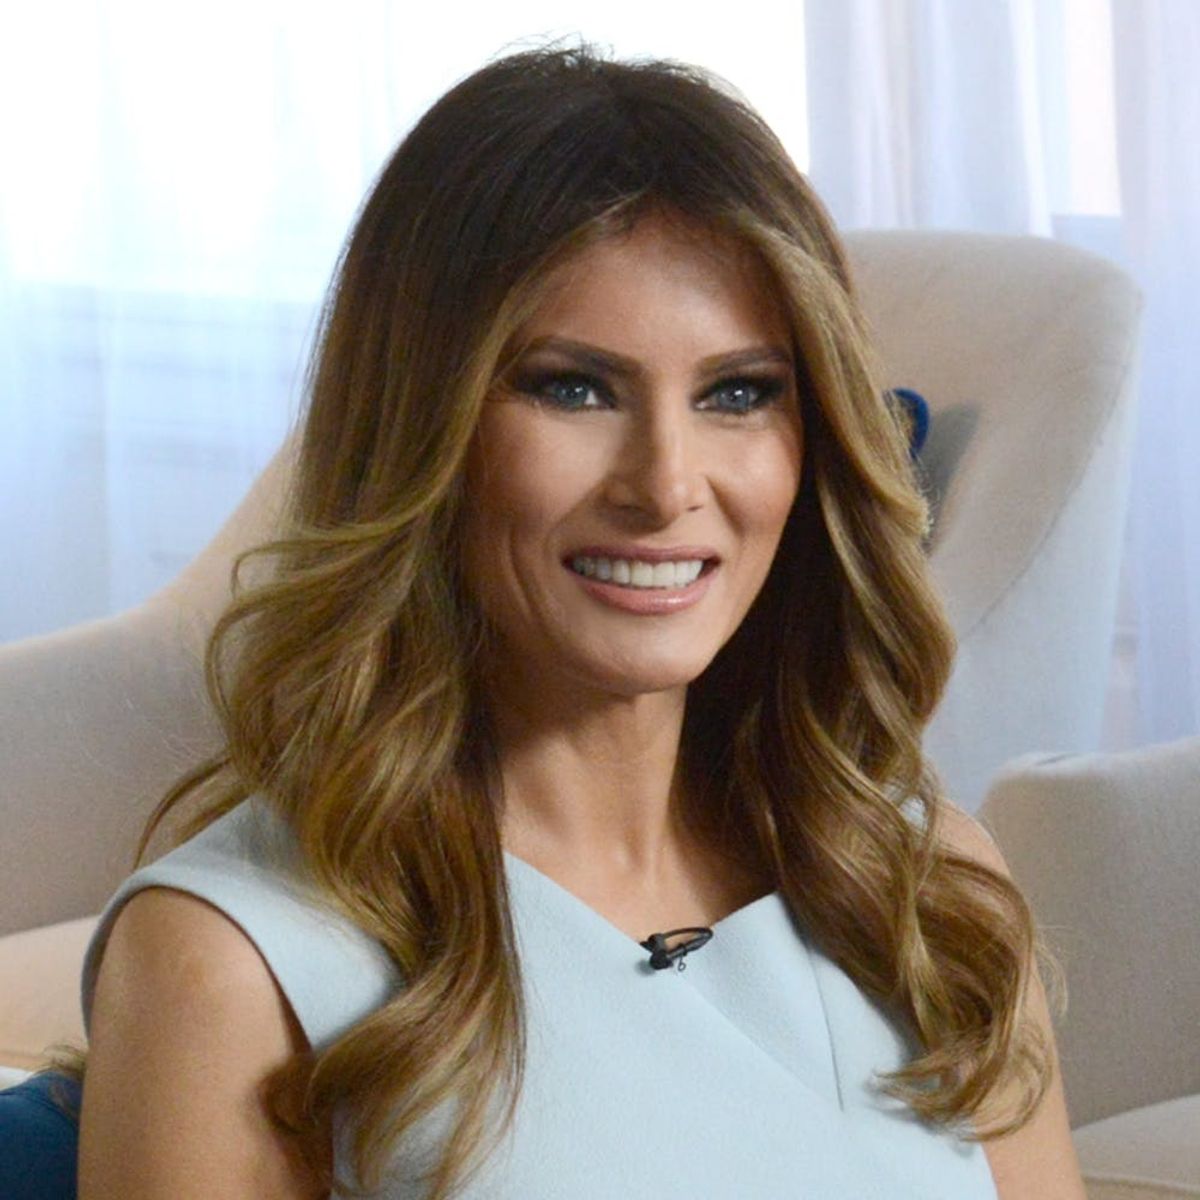 Top Designers Reveal Whether or Not They’ll Dress Melania Trump